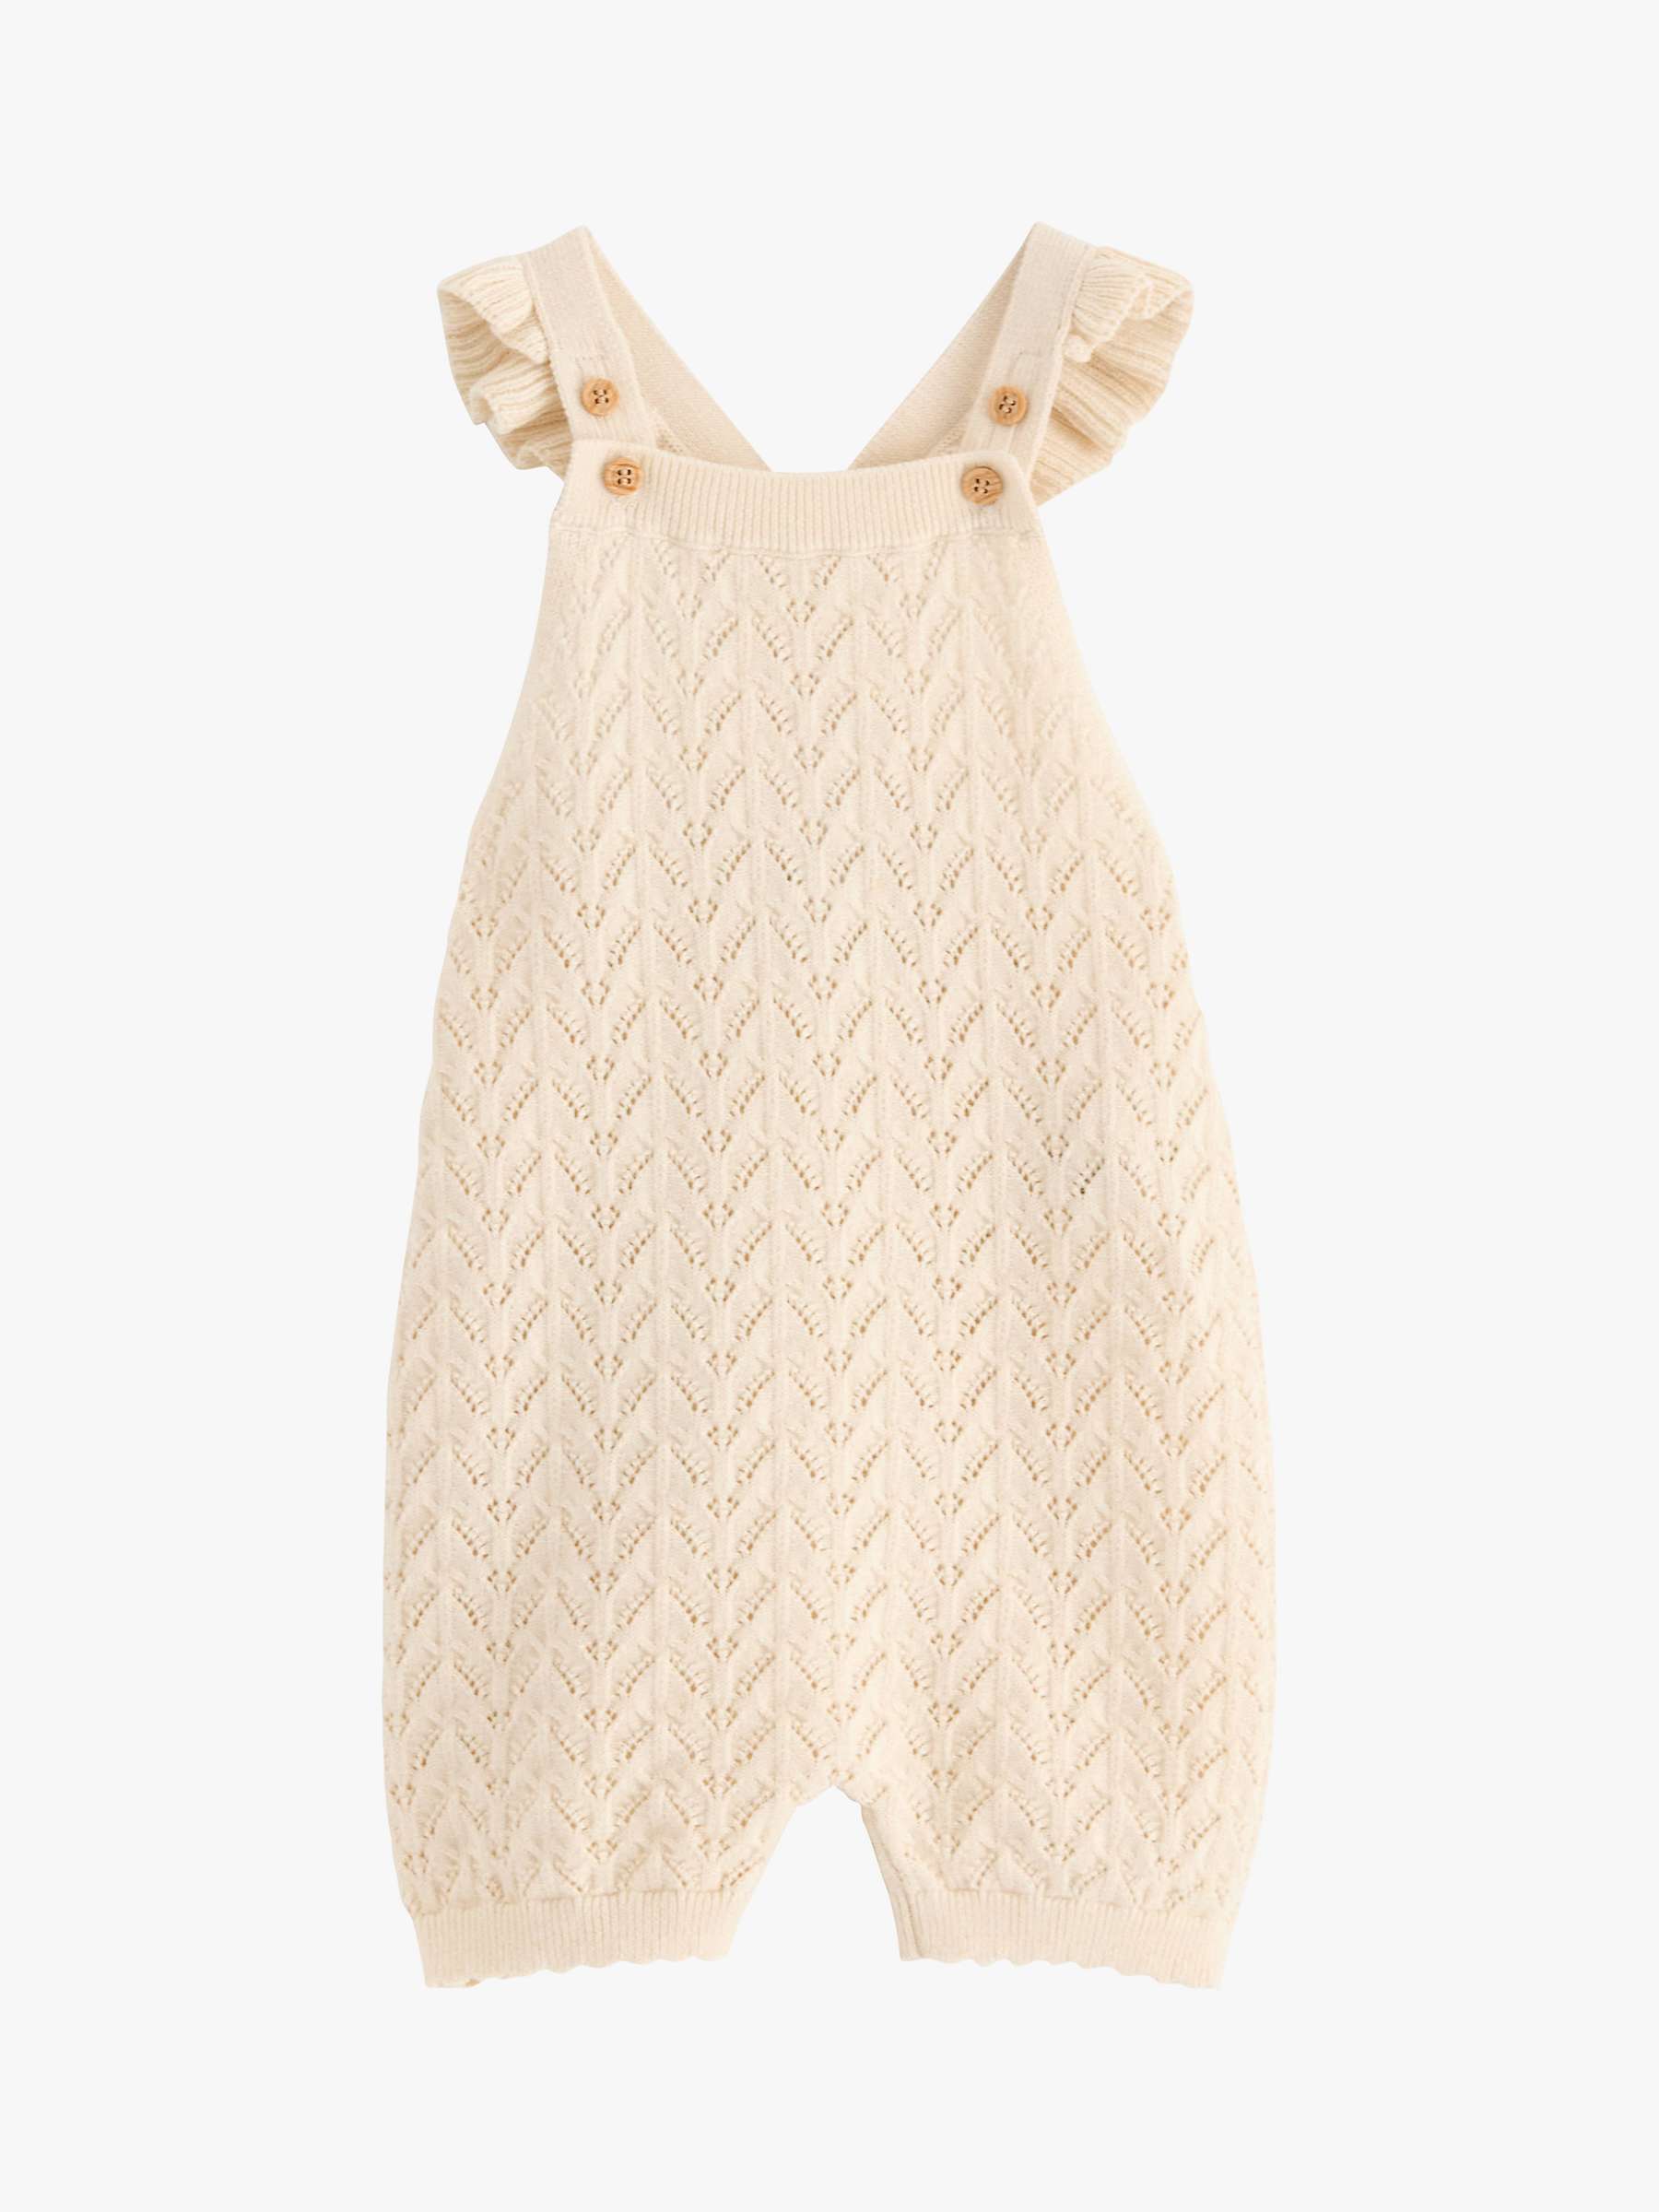 Buy Lindex Baby Knitted Jumpsuit, Beige Online at johnlewis.com